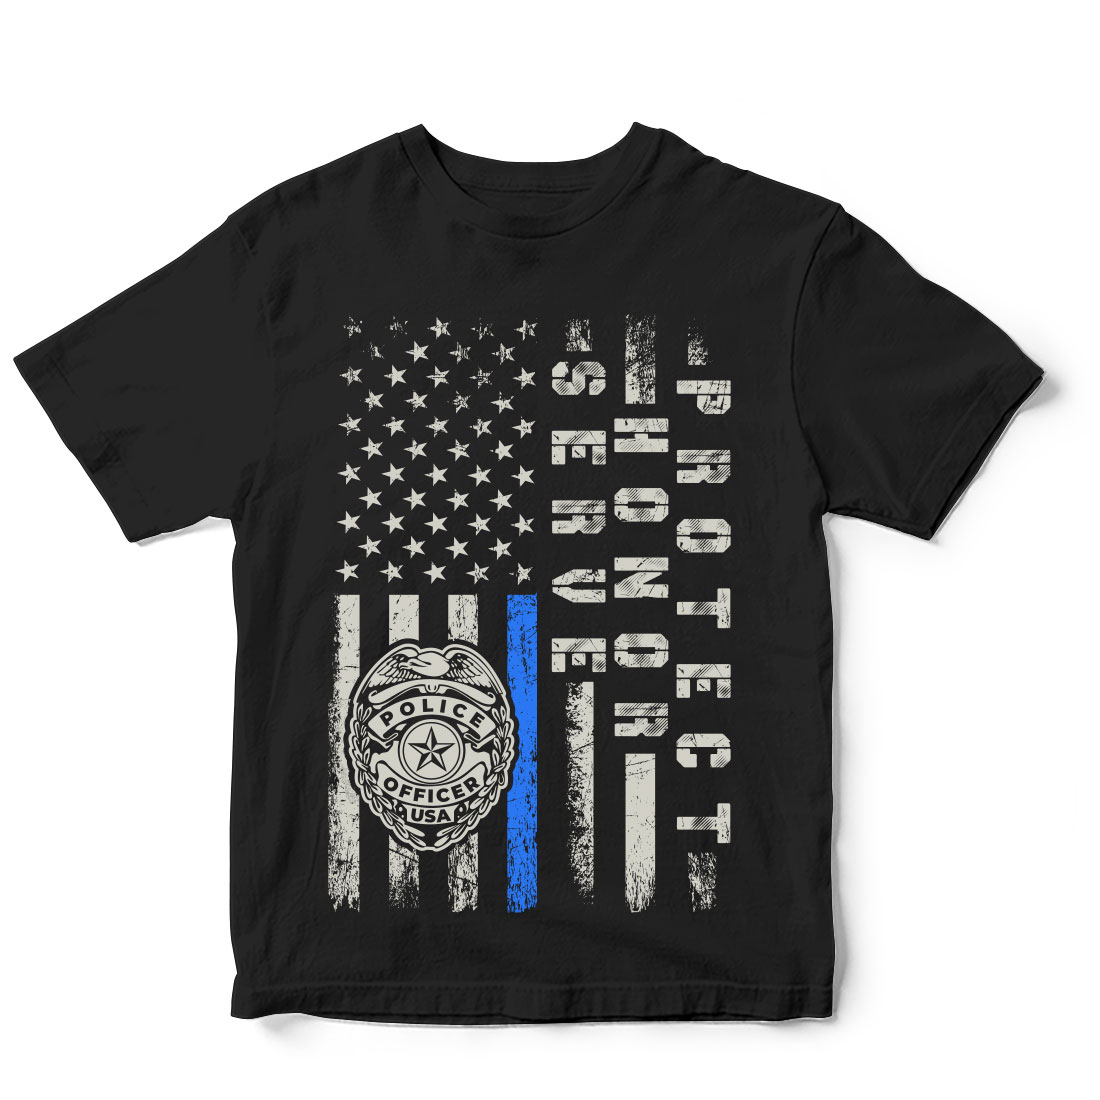 Black shirt with an american flag and a police badge.